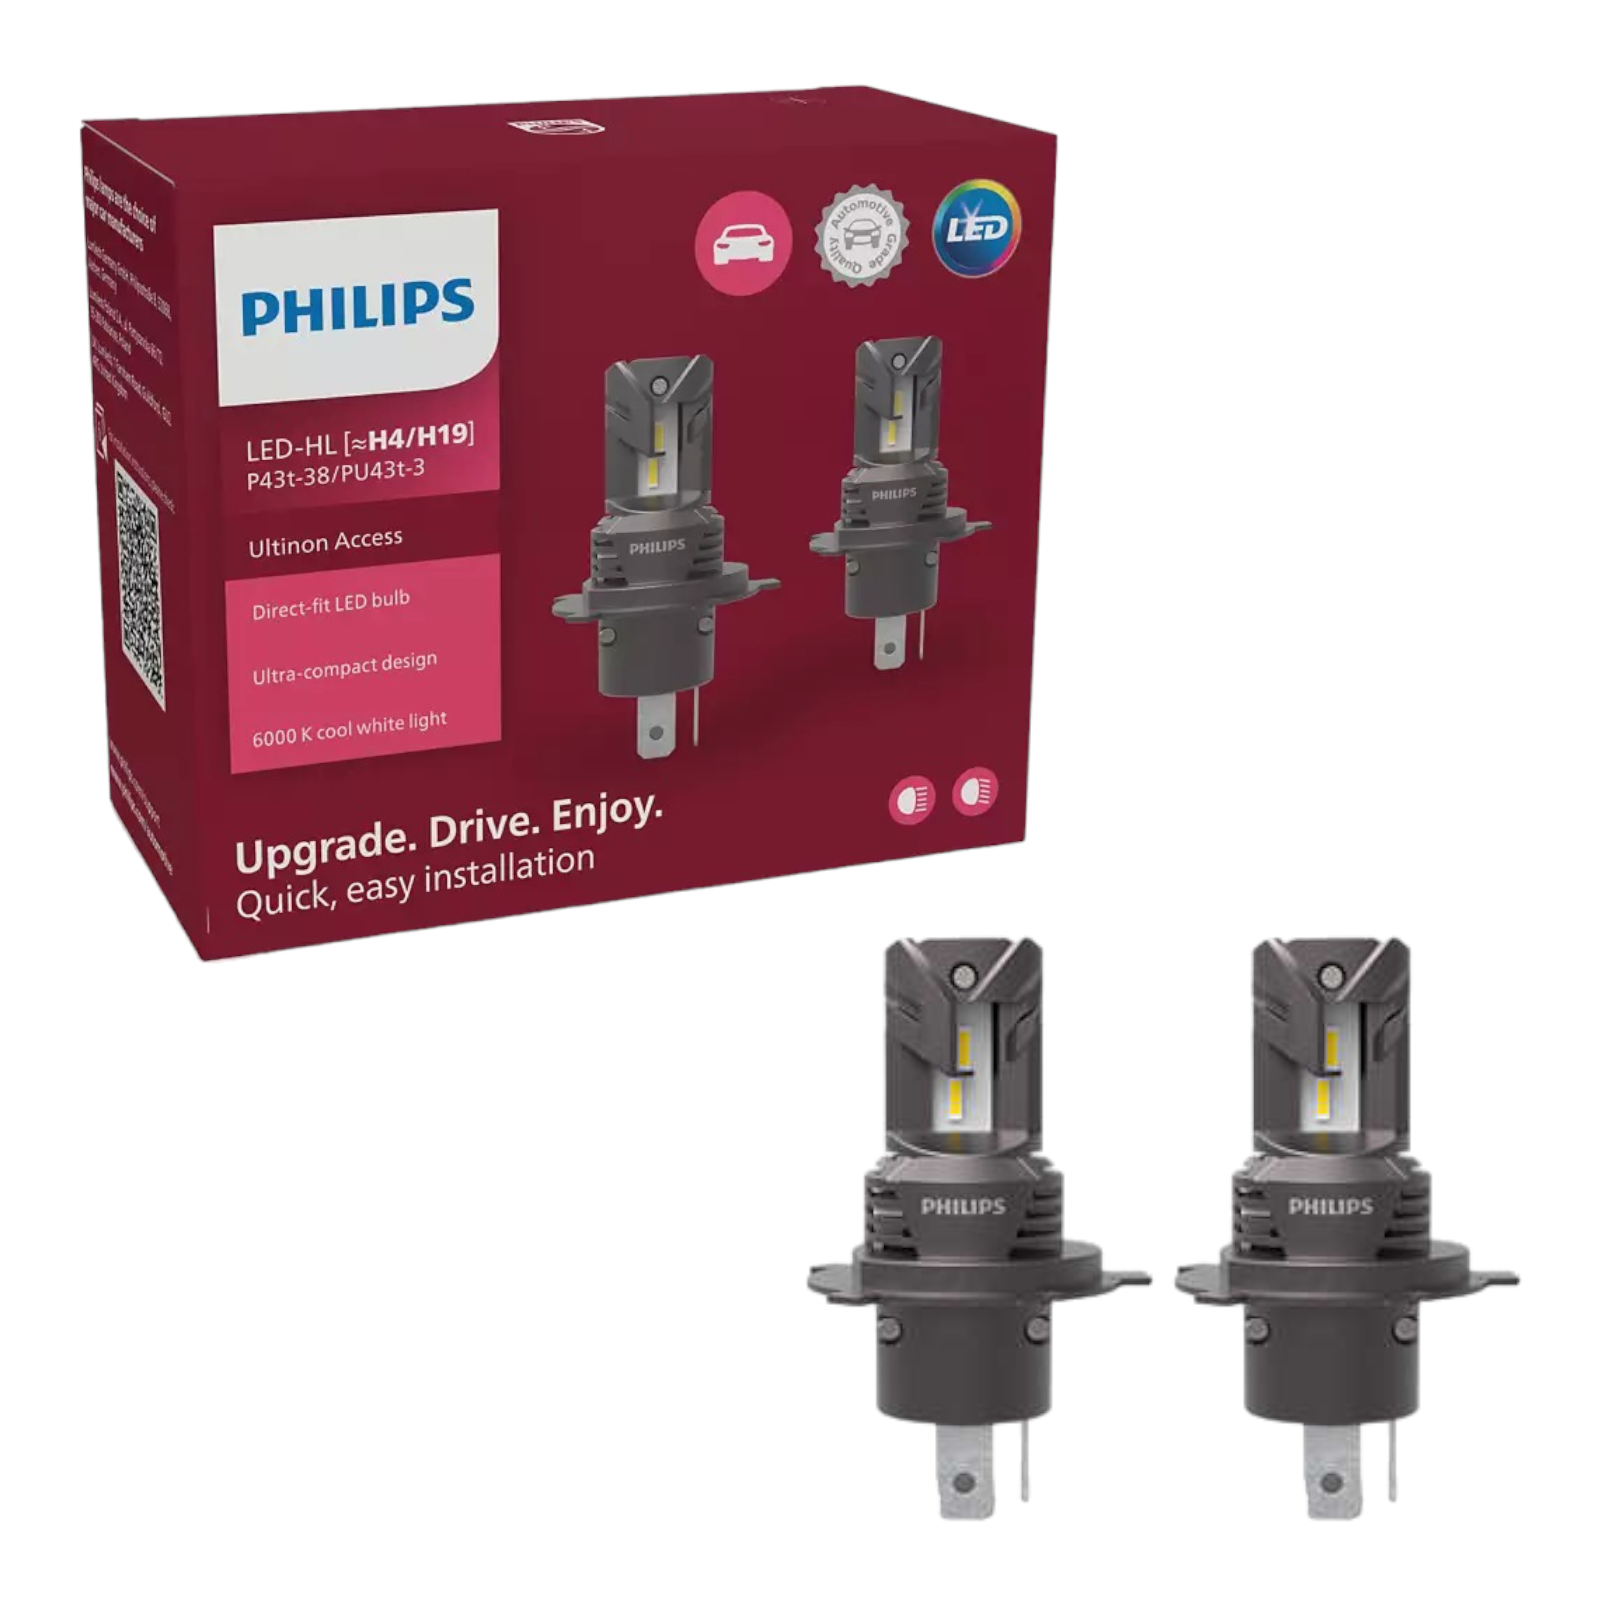 Philips H4 LED Ampoule Phares Voiture H4 H19 Ultinon Access - Ultra  Compacte